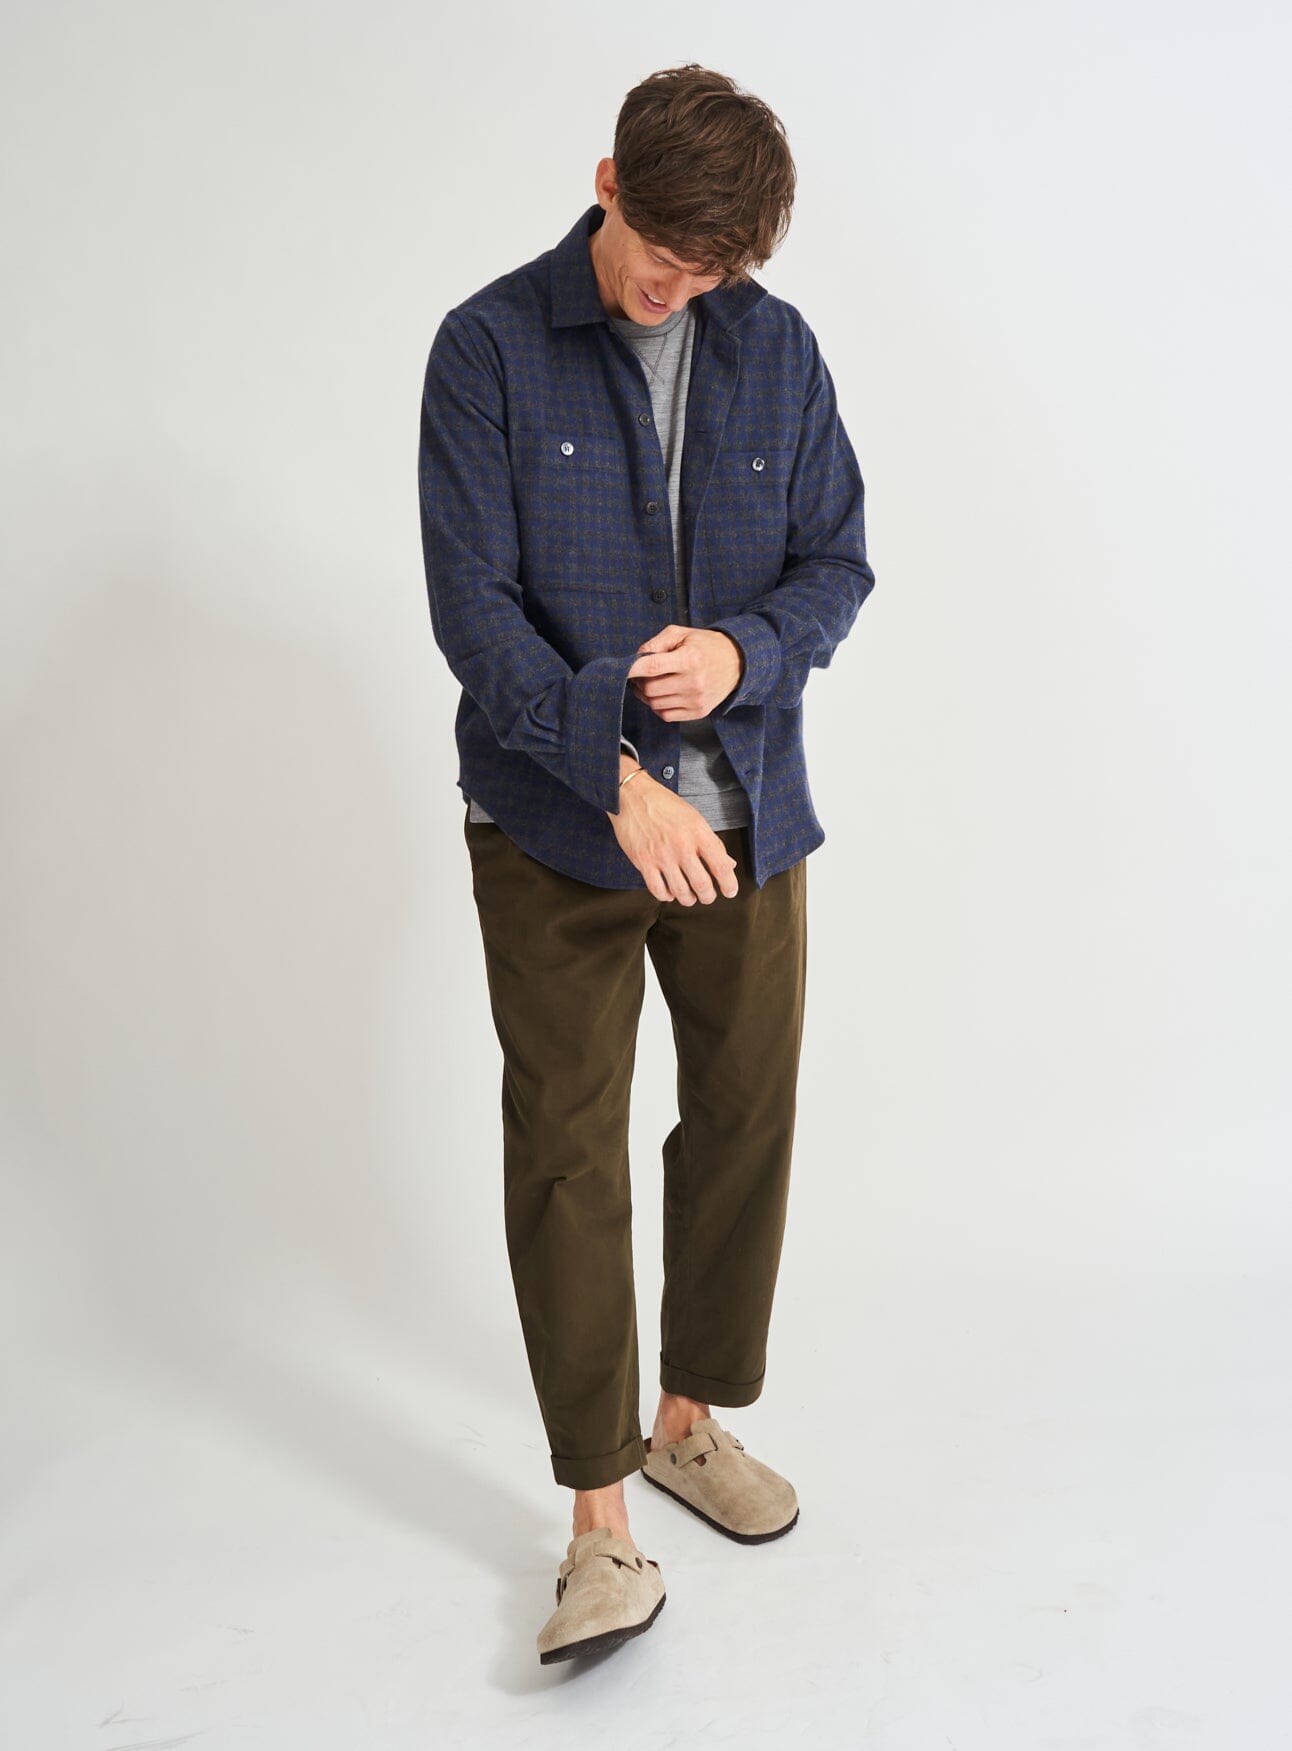 blue flannel shirt, sustainable clothing